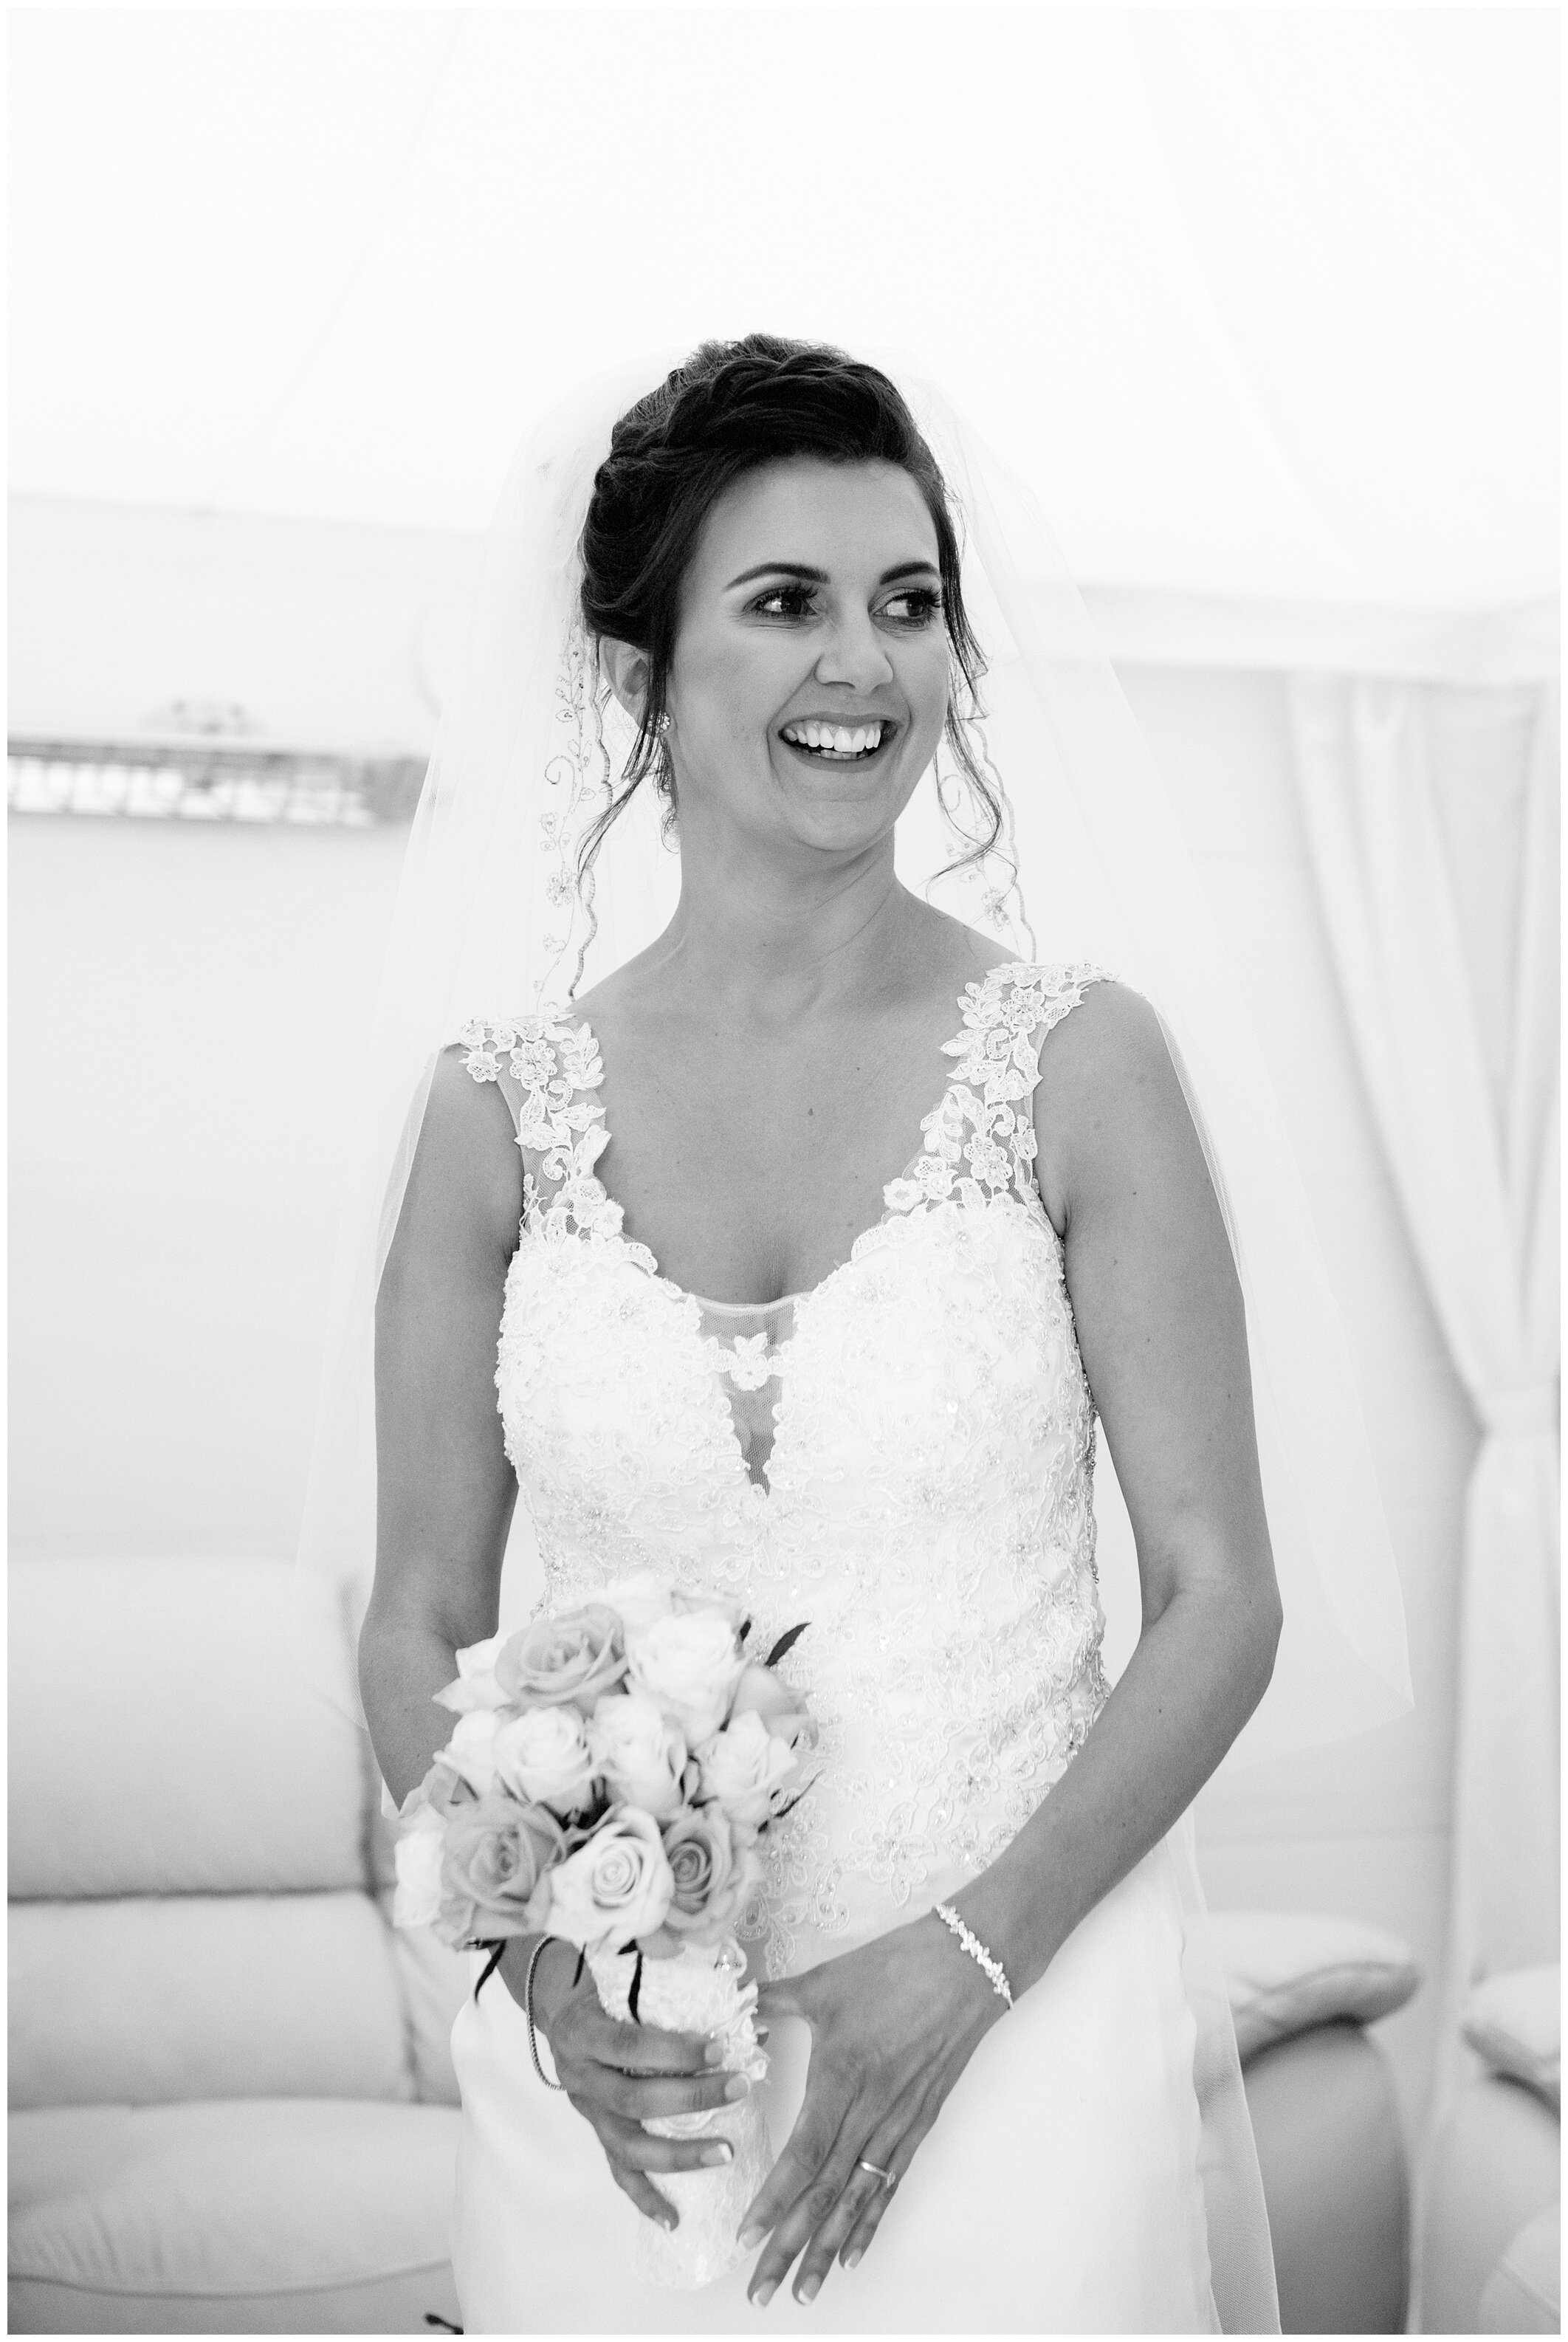 Lynsey_Andy_Rossharbour_Fermanagh_wedding_jude_browne_photography_0030.jpg